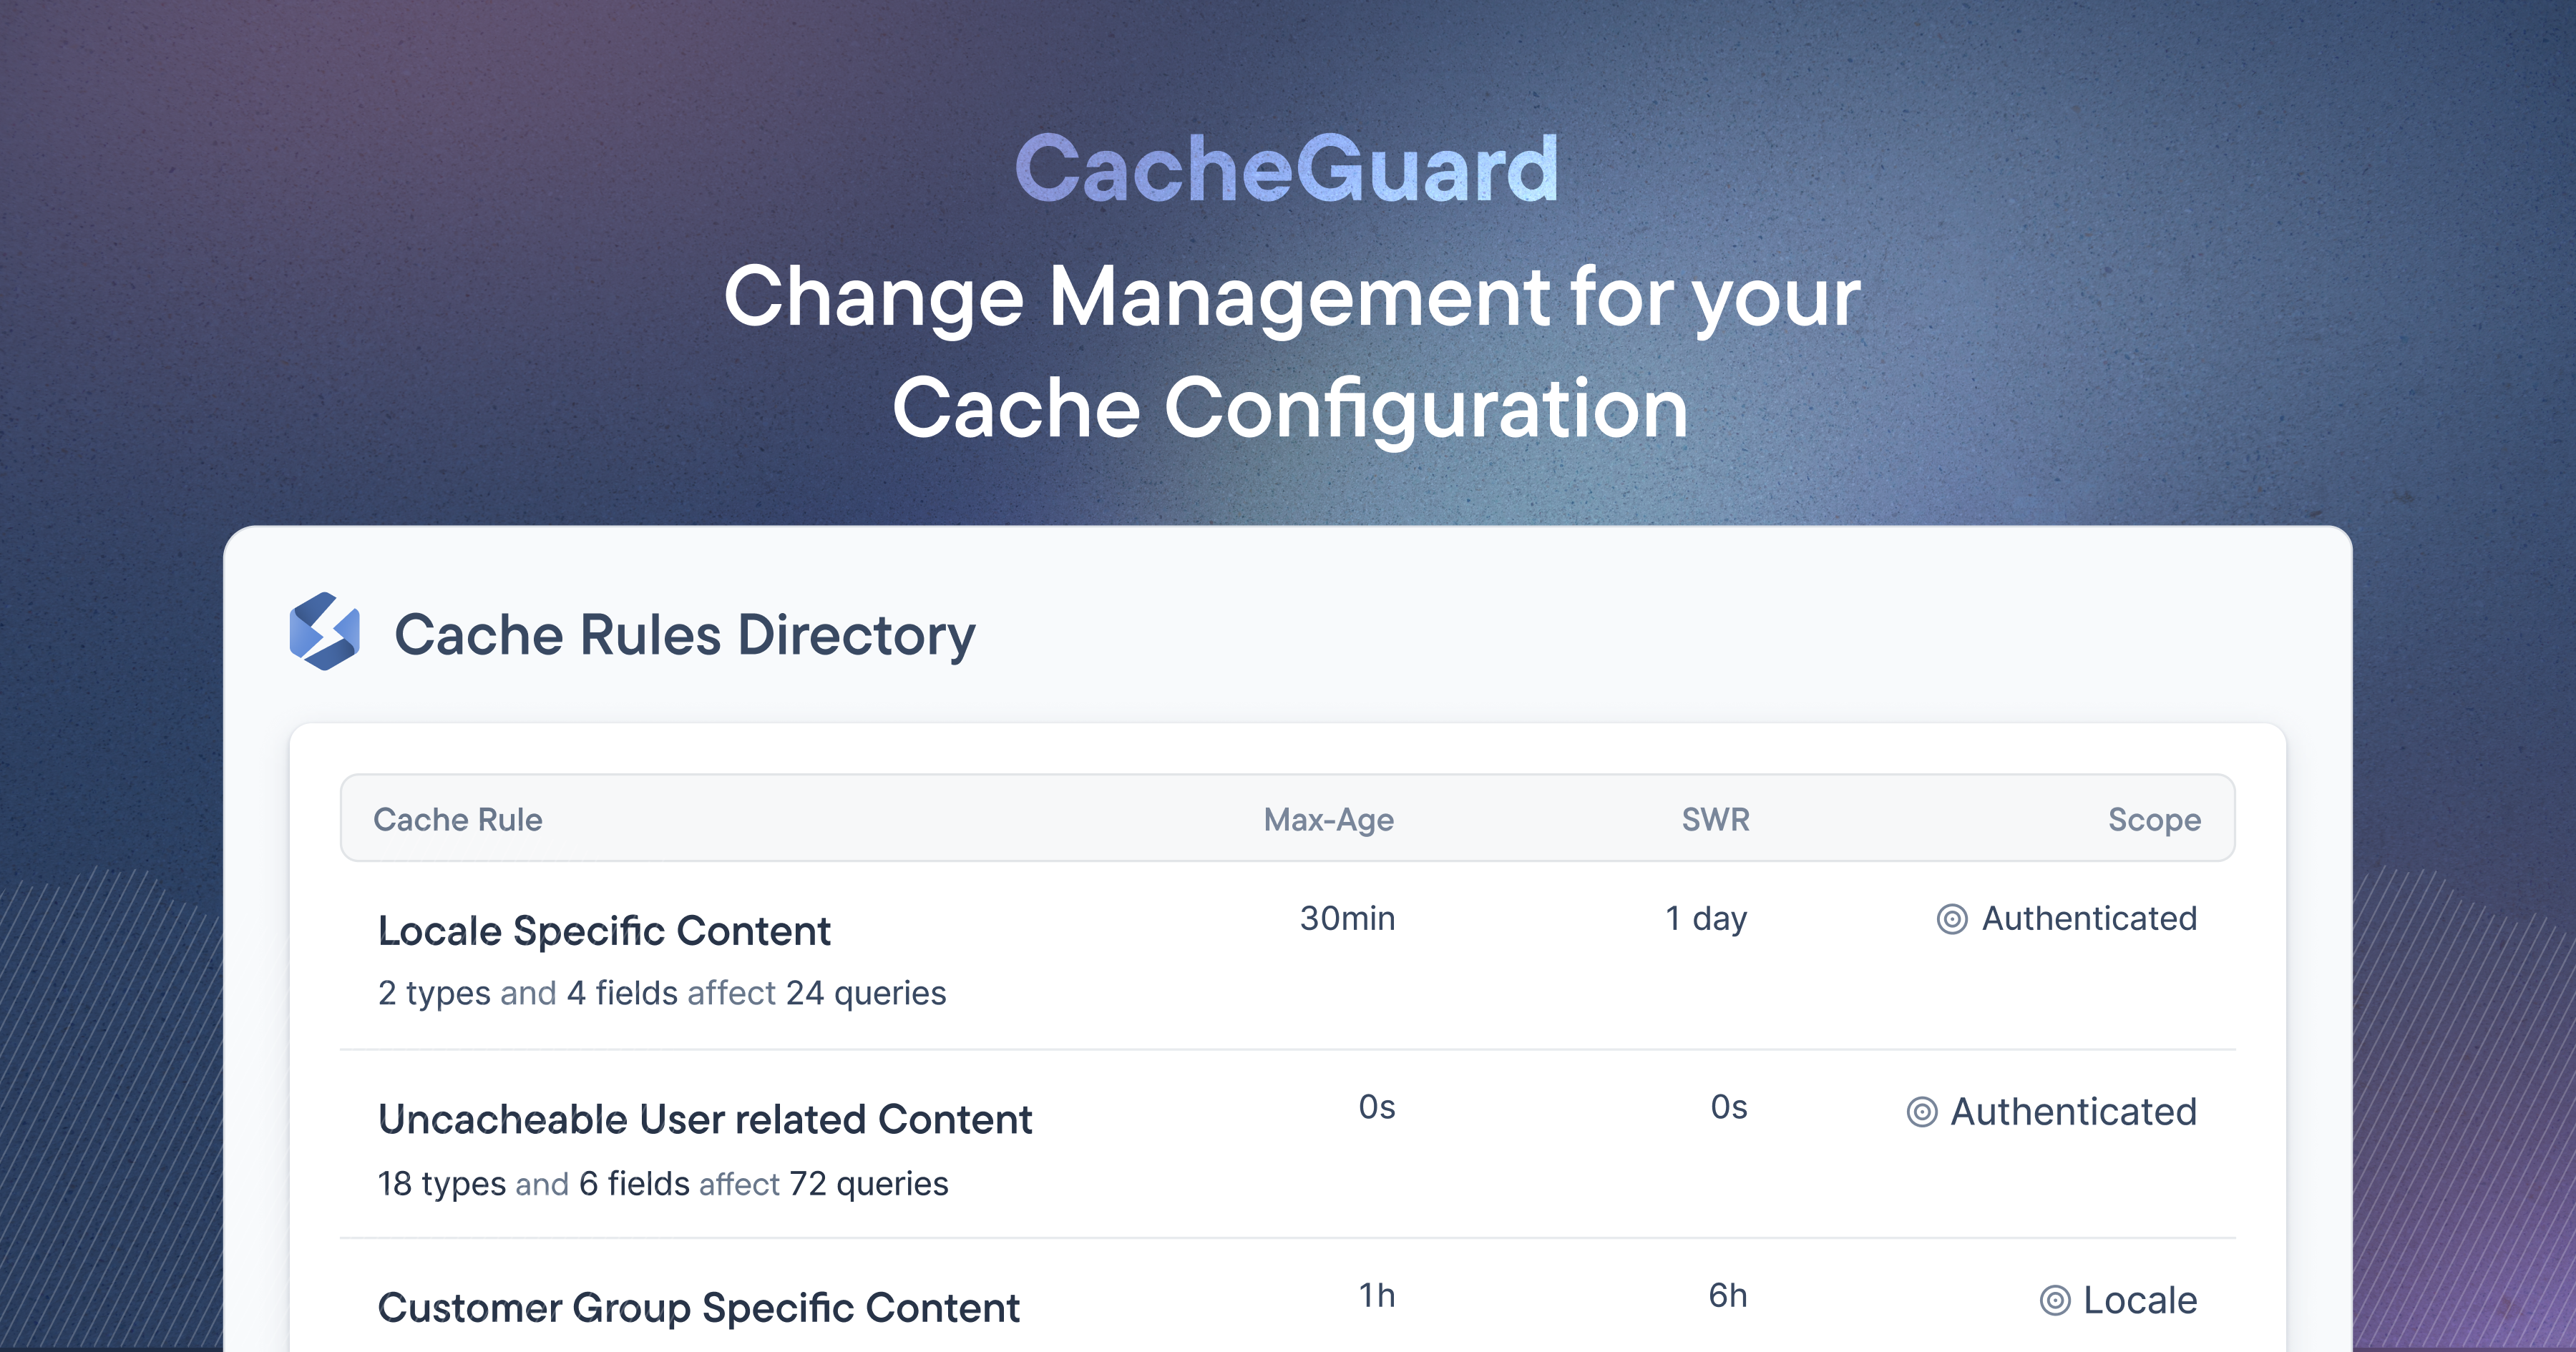 Introducing CacheGuard: Change Management for your Cache Configuration